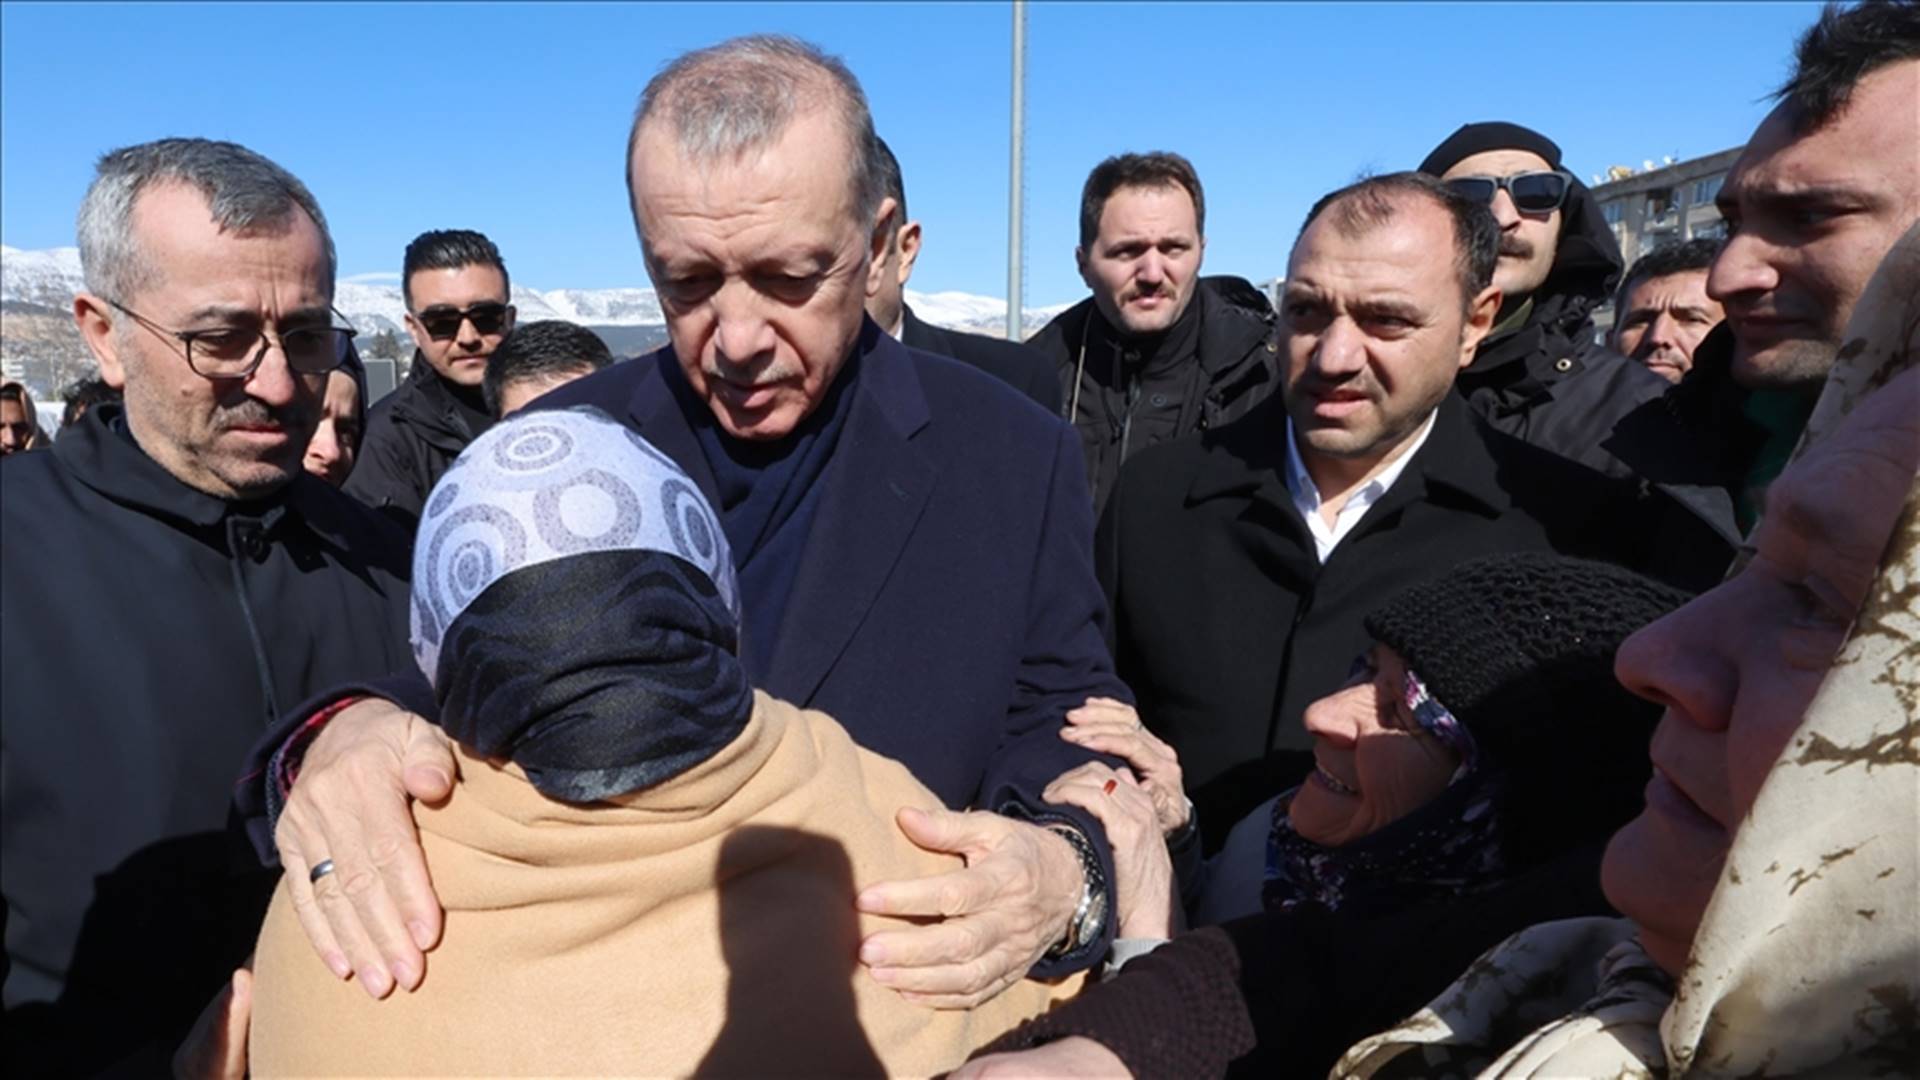 All resources mobilized in Türkiye after powerful quakes, says the President Erdogan